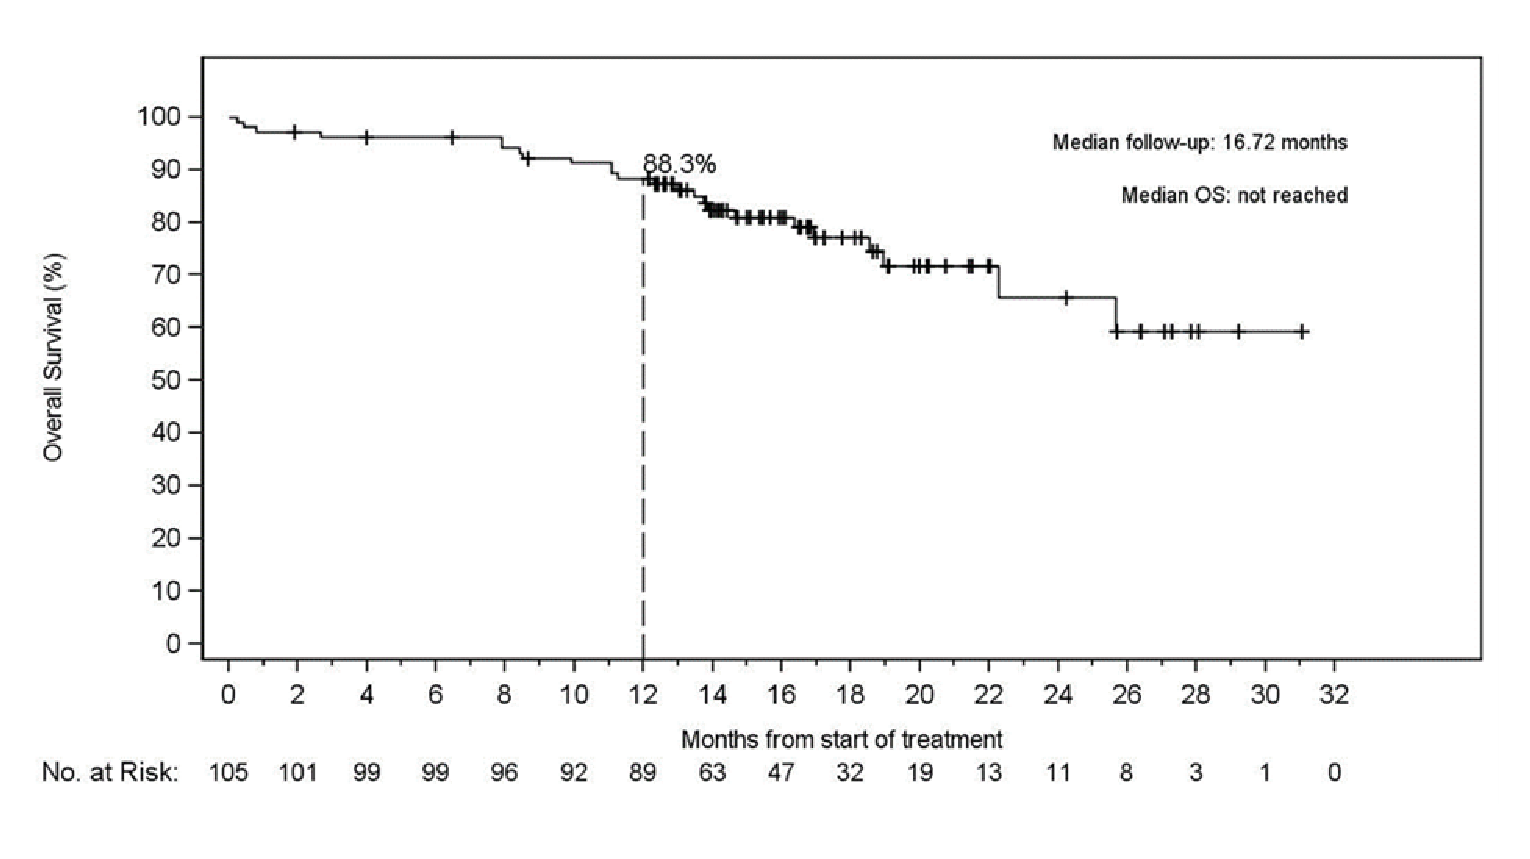 In this Kaplan–Meier plot of overall survival in patients in the primary analysis set (RET fusion-positive non–small cell lung cancer with prior platinum chemotherapy), based on the independent radiographic committee assessment, the number of at-risk patients receiving selpercatinib at 0, 2, 4, 6, 8, 12, 14, 16, 18, 20, 22, 24, 26, 28, 30, and 32 months was 105, 101, 99, 99, 96, 92, 89, 63, 47, 32, 19, 13, 11, 8, 3, 1, and 0, respectively. The median OS was not reached.